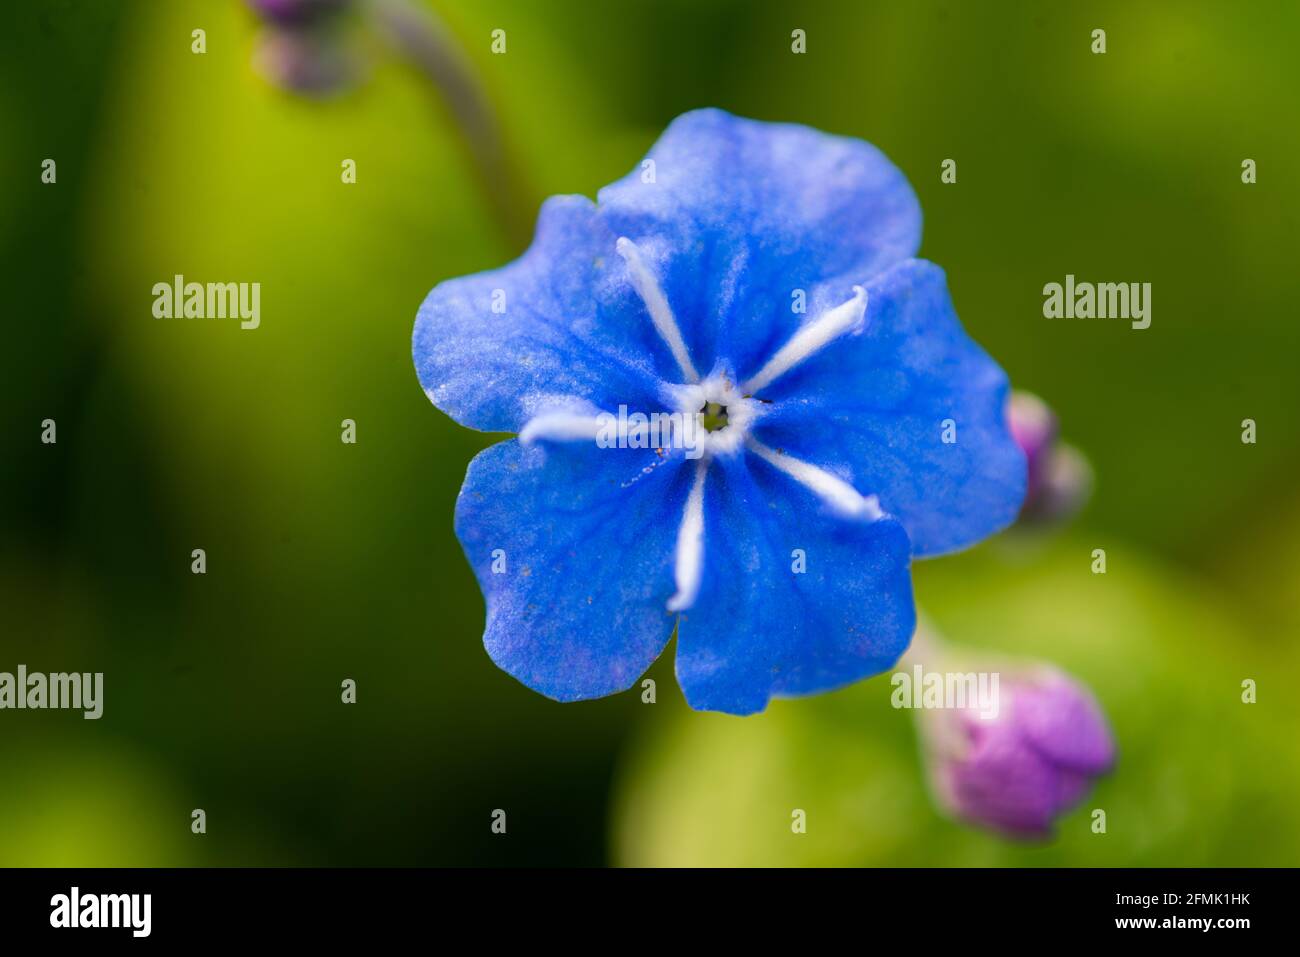 Omphalodes verna. Little blue flowers close up on a background of green leaves Stock Photo